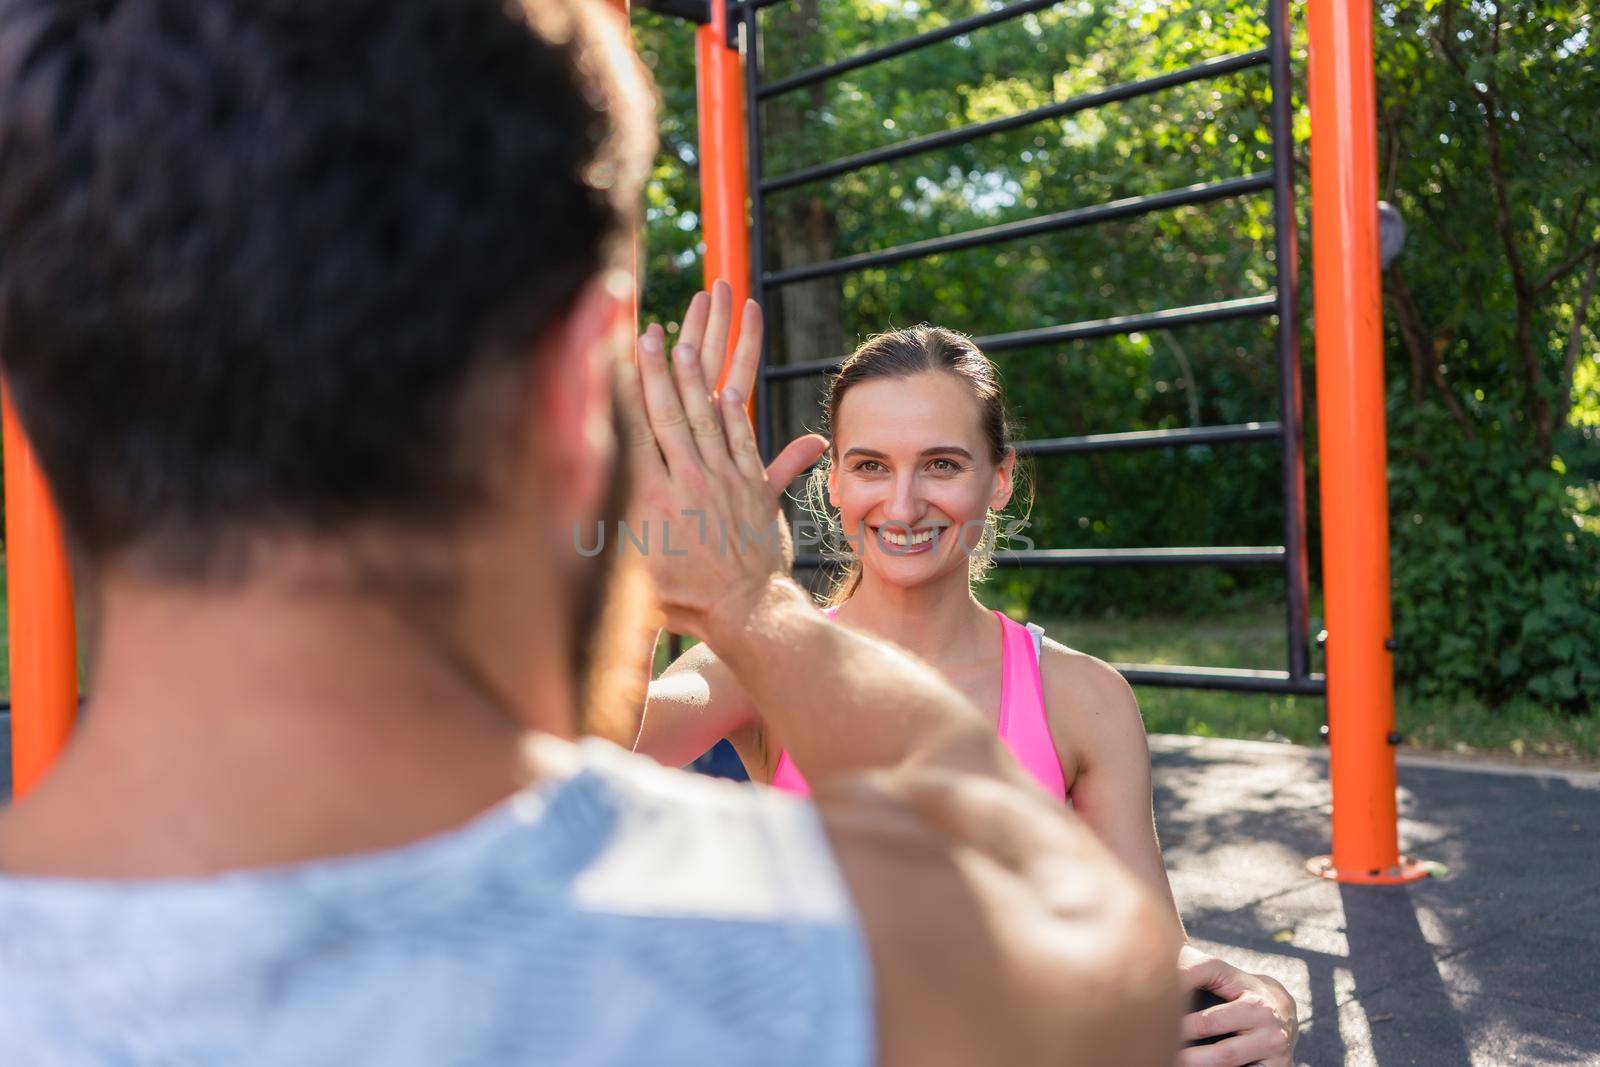 Over the shoulder view of a cheerful young woman giving high-five to her partner, while doing crunches outdoors during couple workout in a fitness park